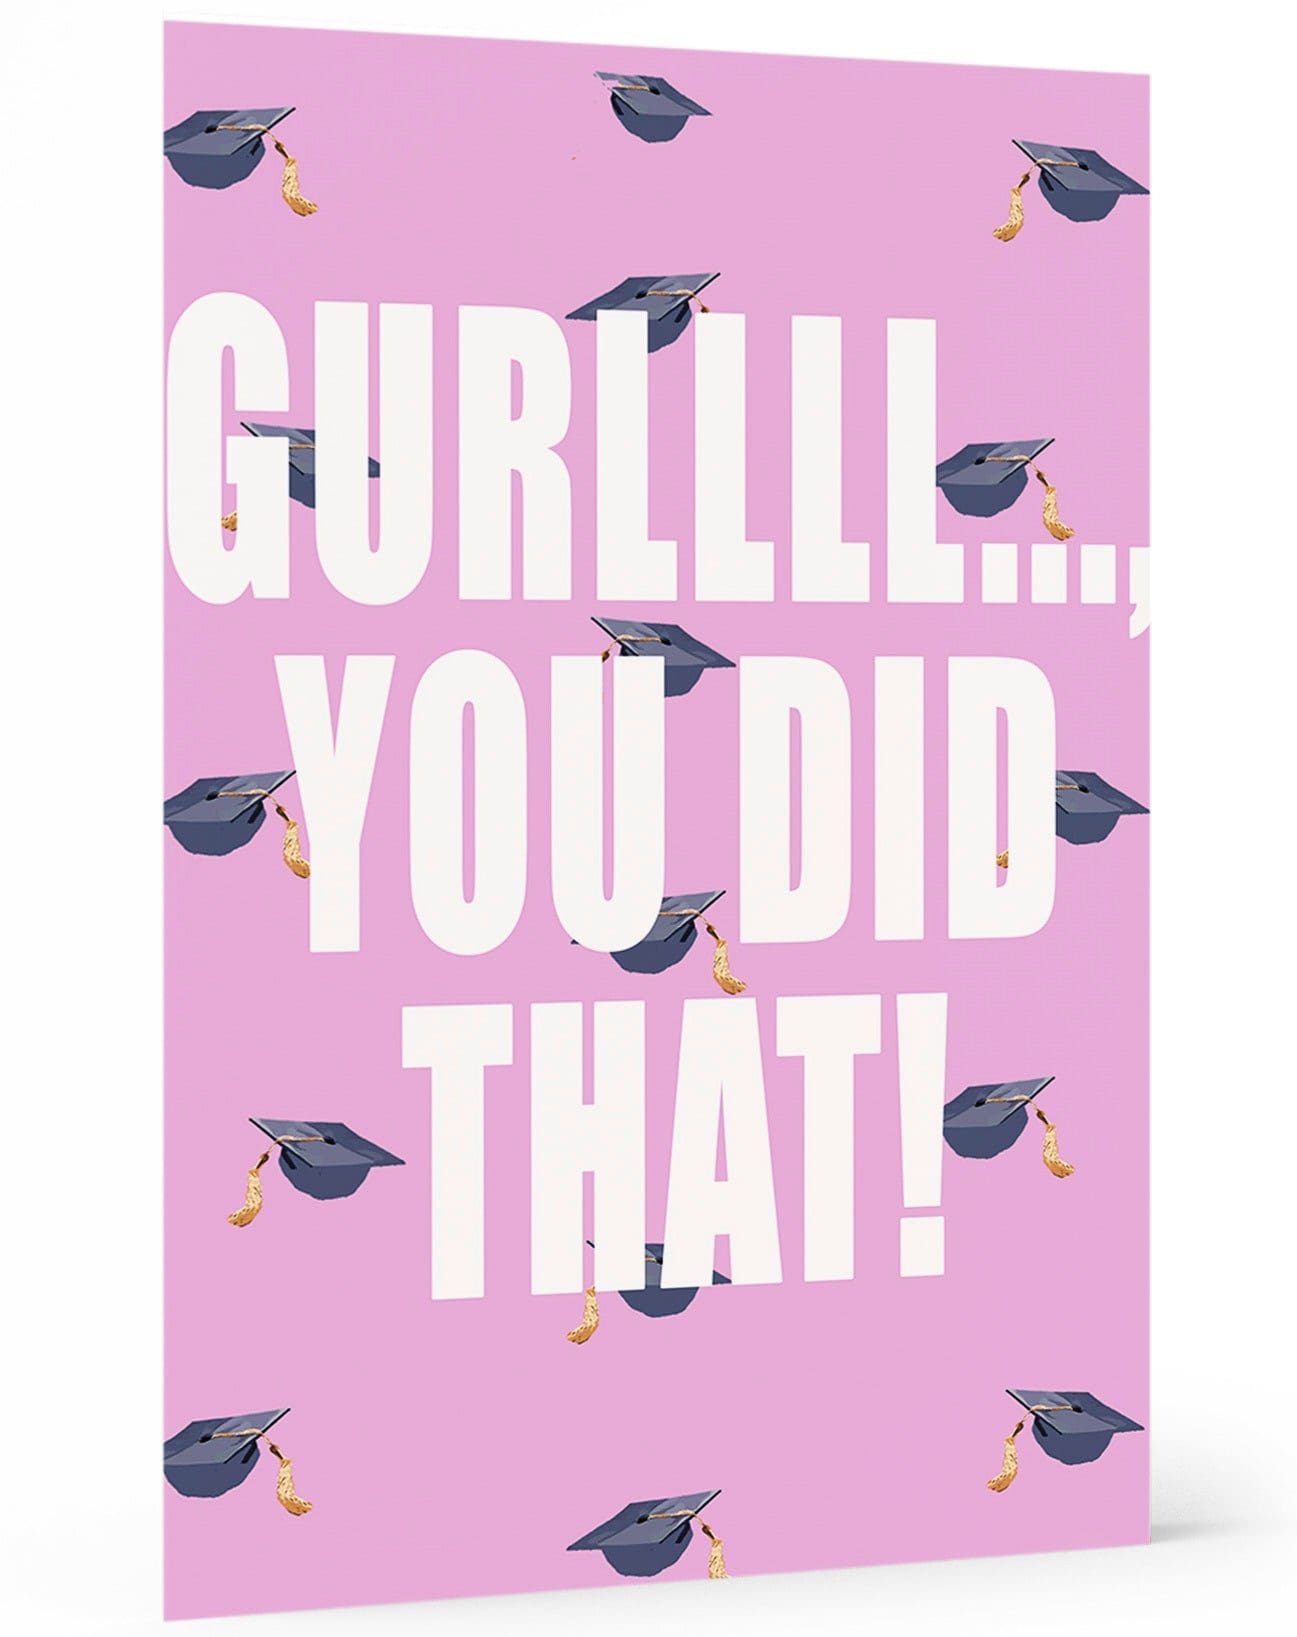 Gurllll Card, wakuda, african print fans, black-owned brands, black pound day